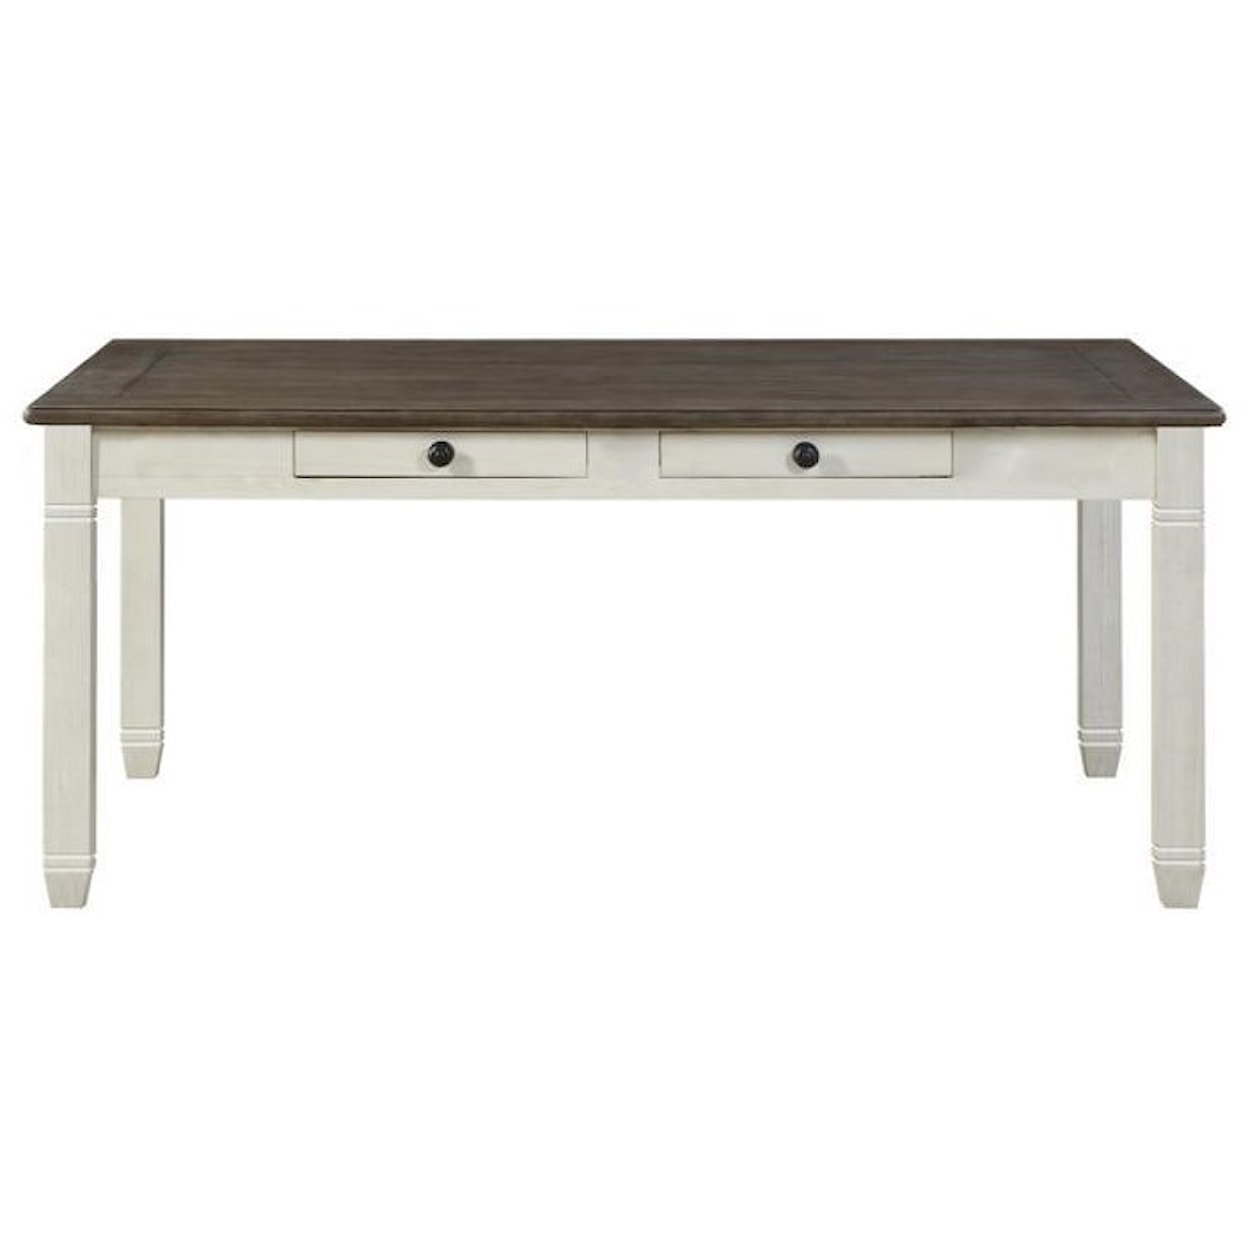 Homelegance Granby Dining Table